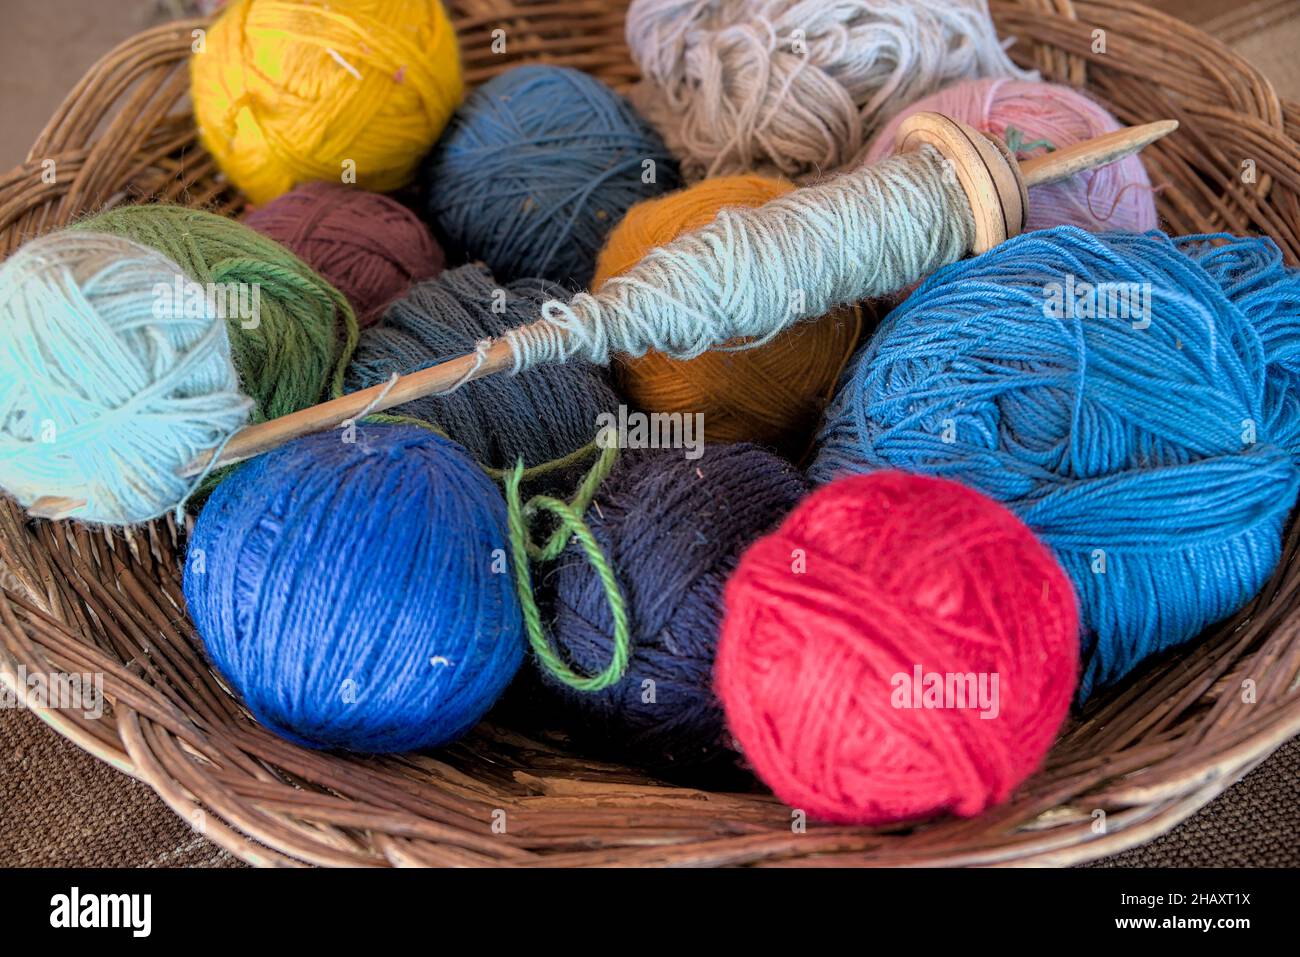 Dyed alpaca llama wool in balls with traditional knitting needles resting in wicker bowl basket at peruvian textile farm for tourists to see ancient m Stock Photo